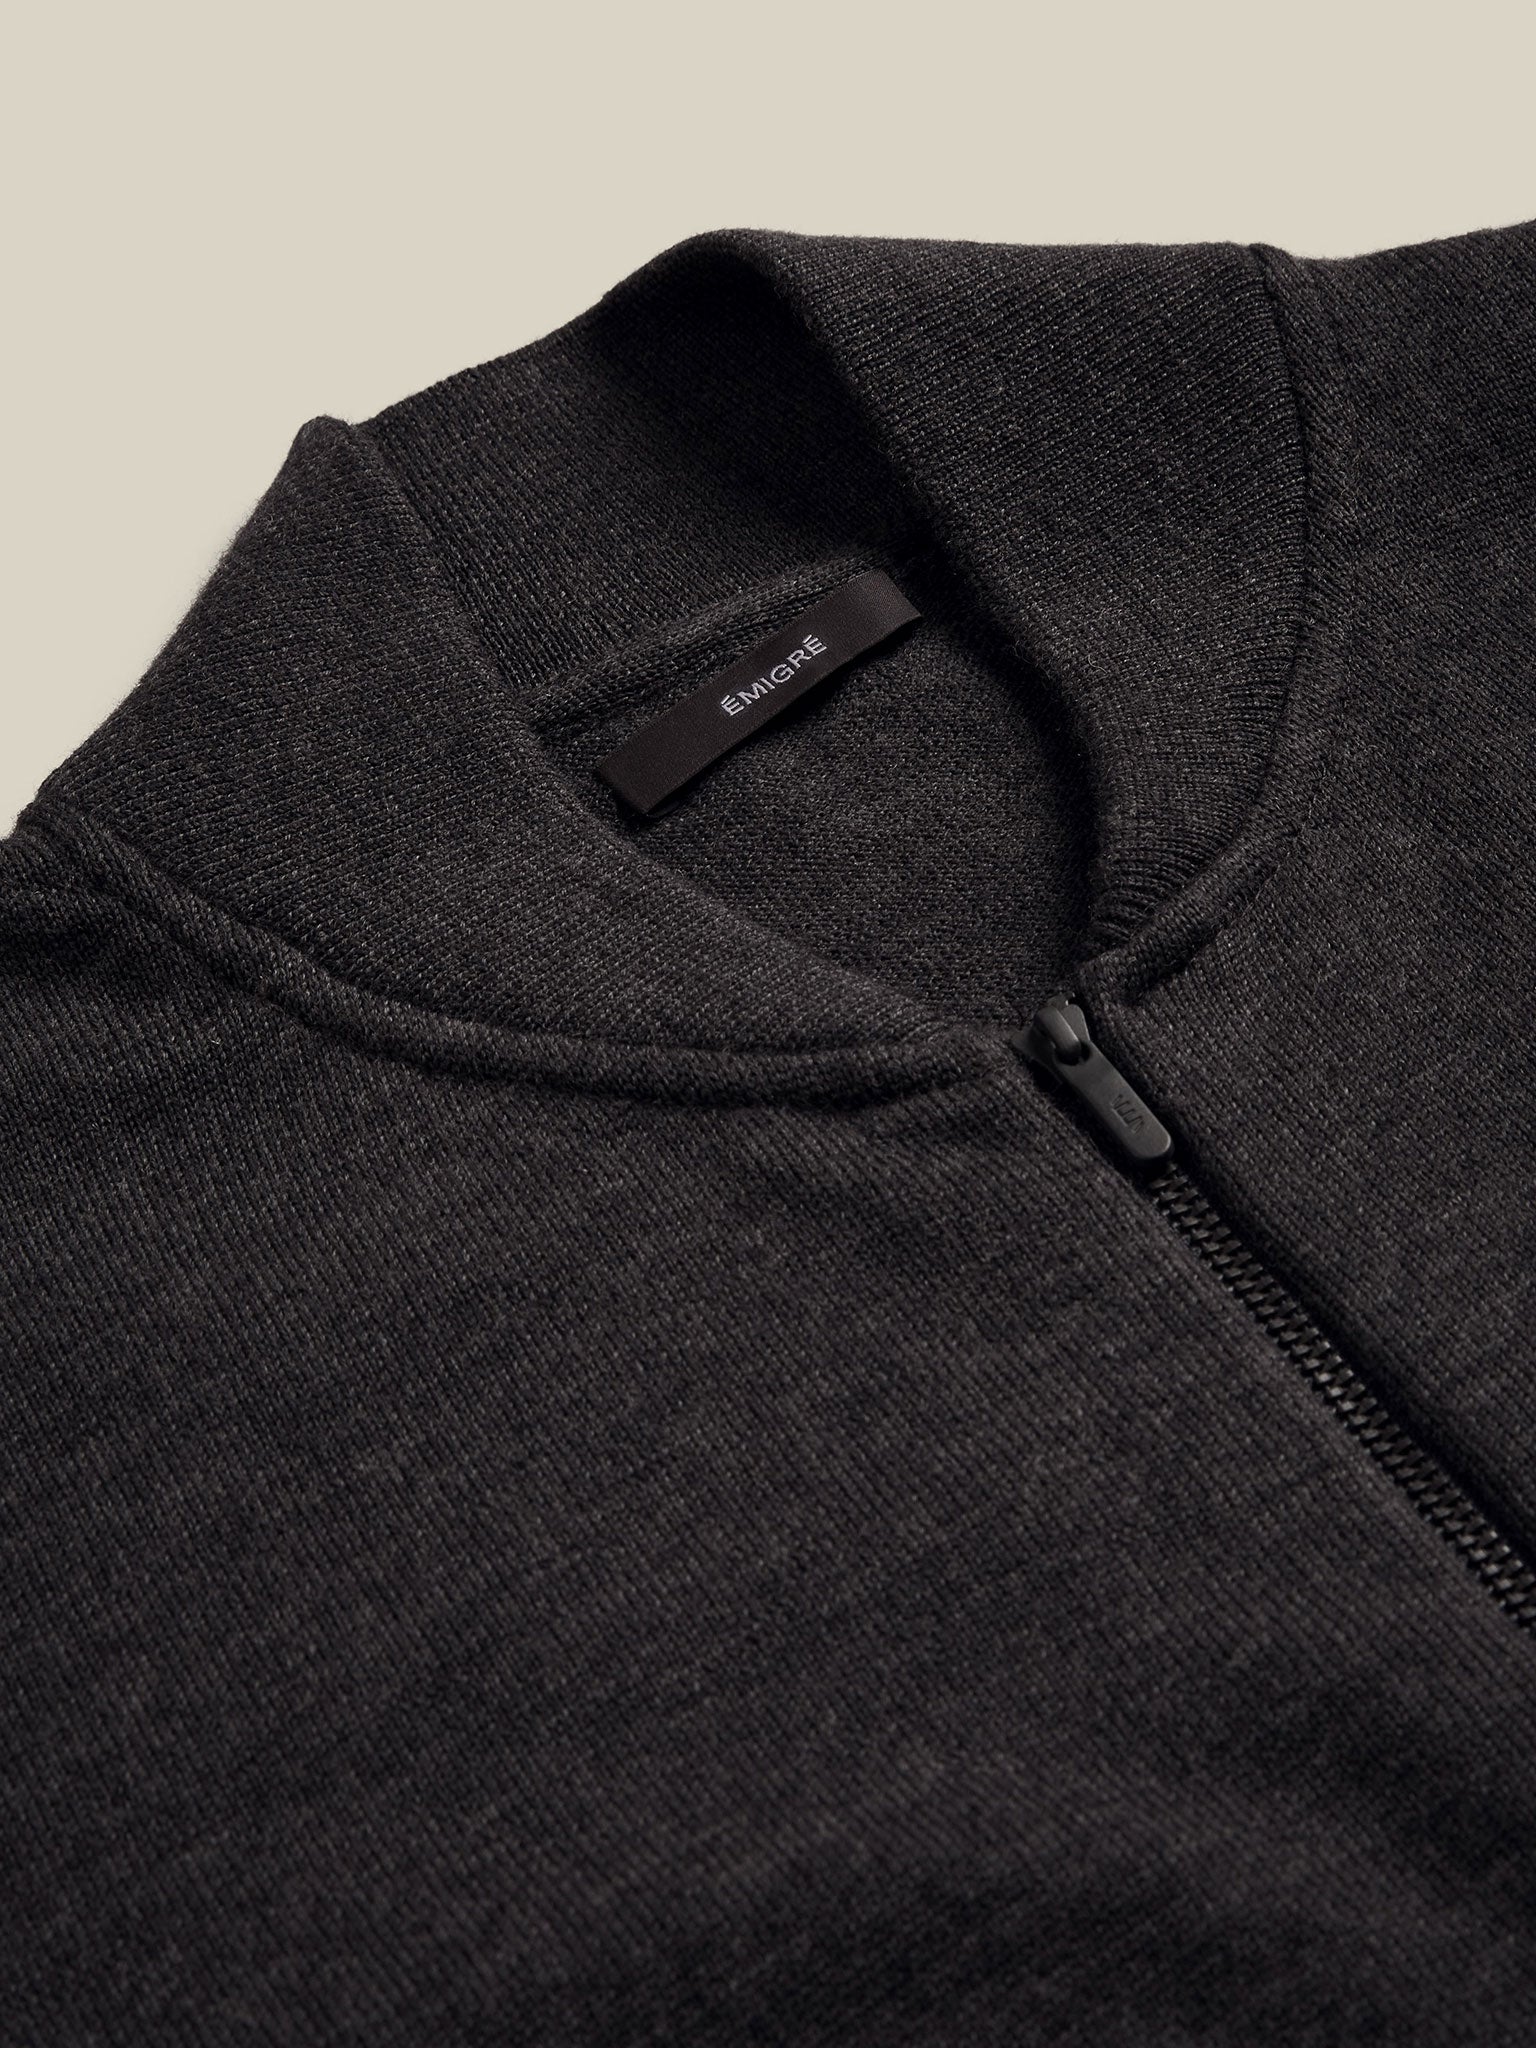 Stay warm and stylish with our collection of grey zip-up cardigans. Made with high-quality materials, they're a timeless layering essential.